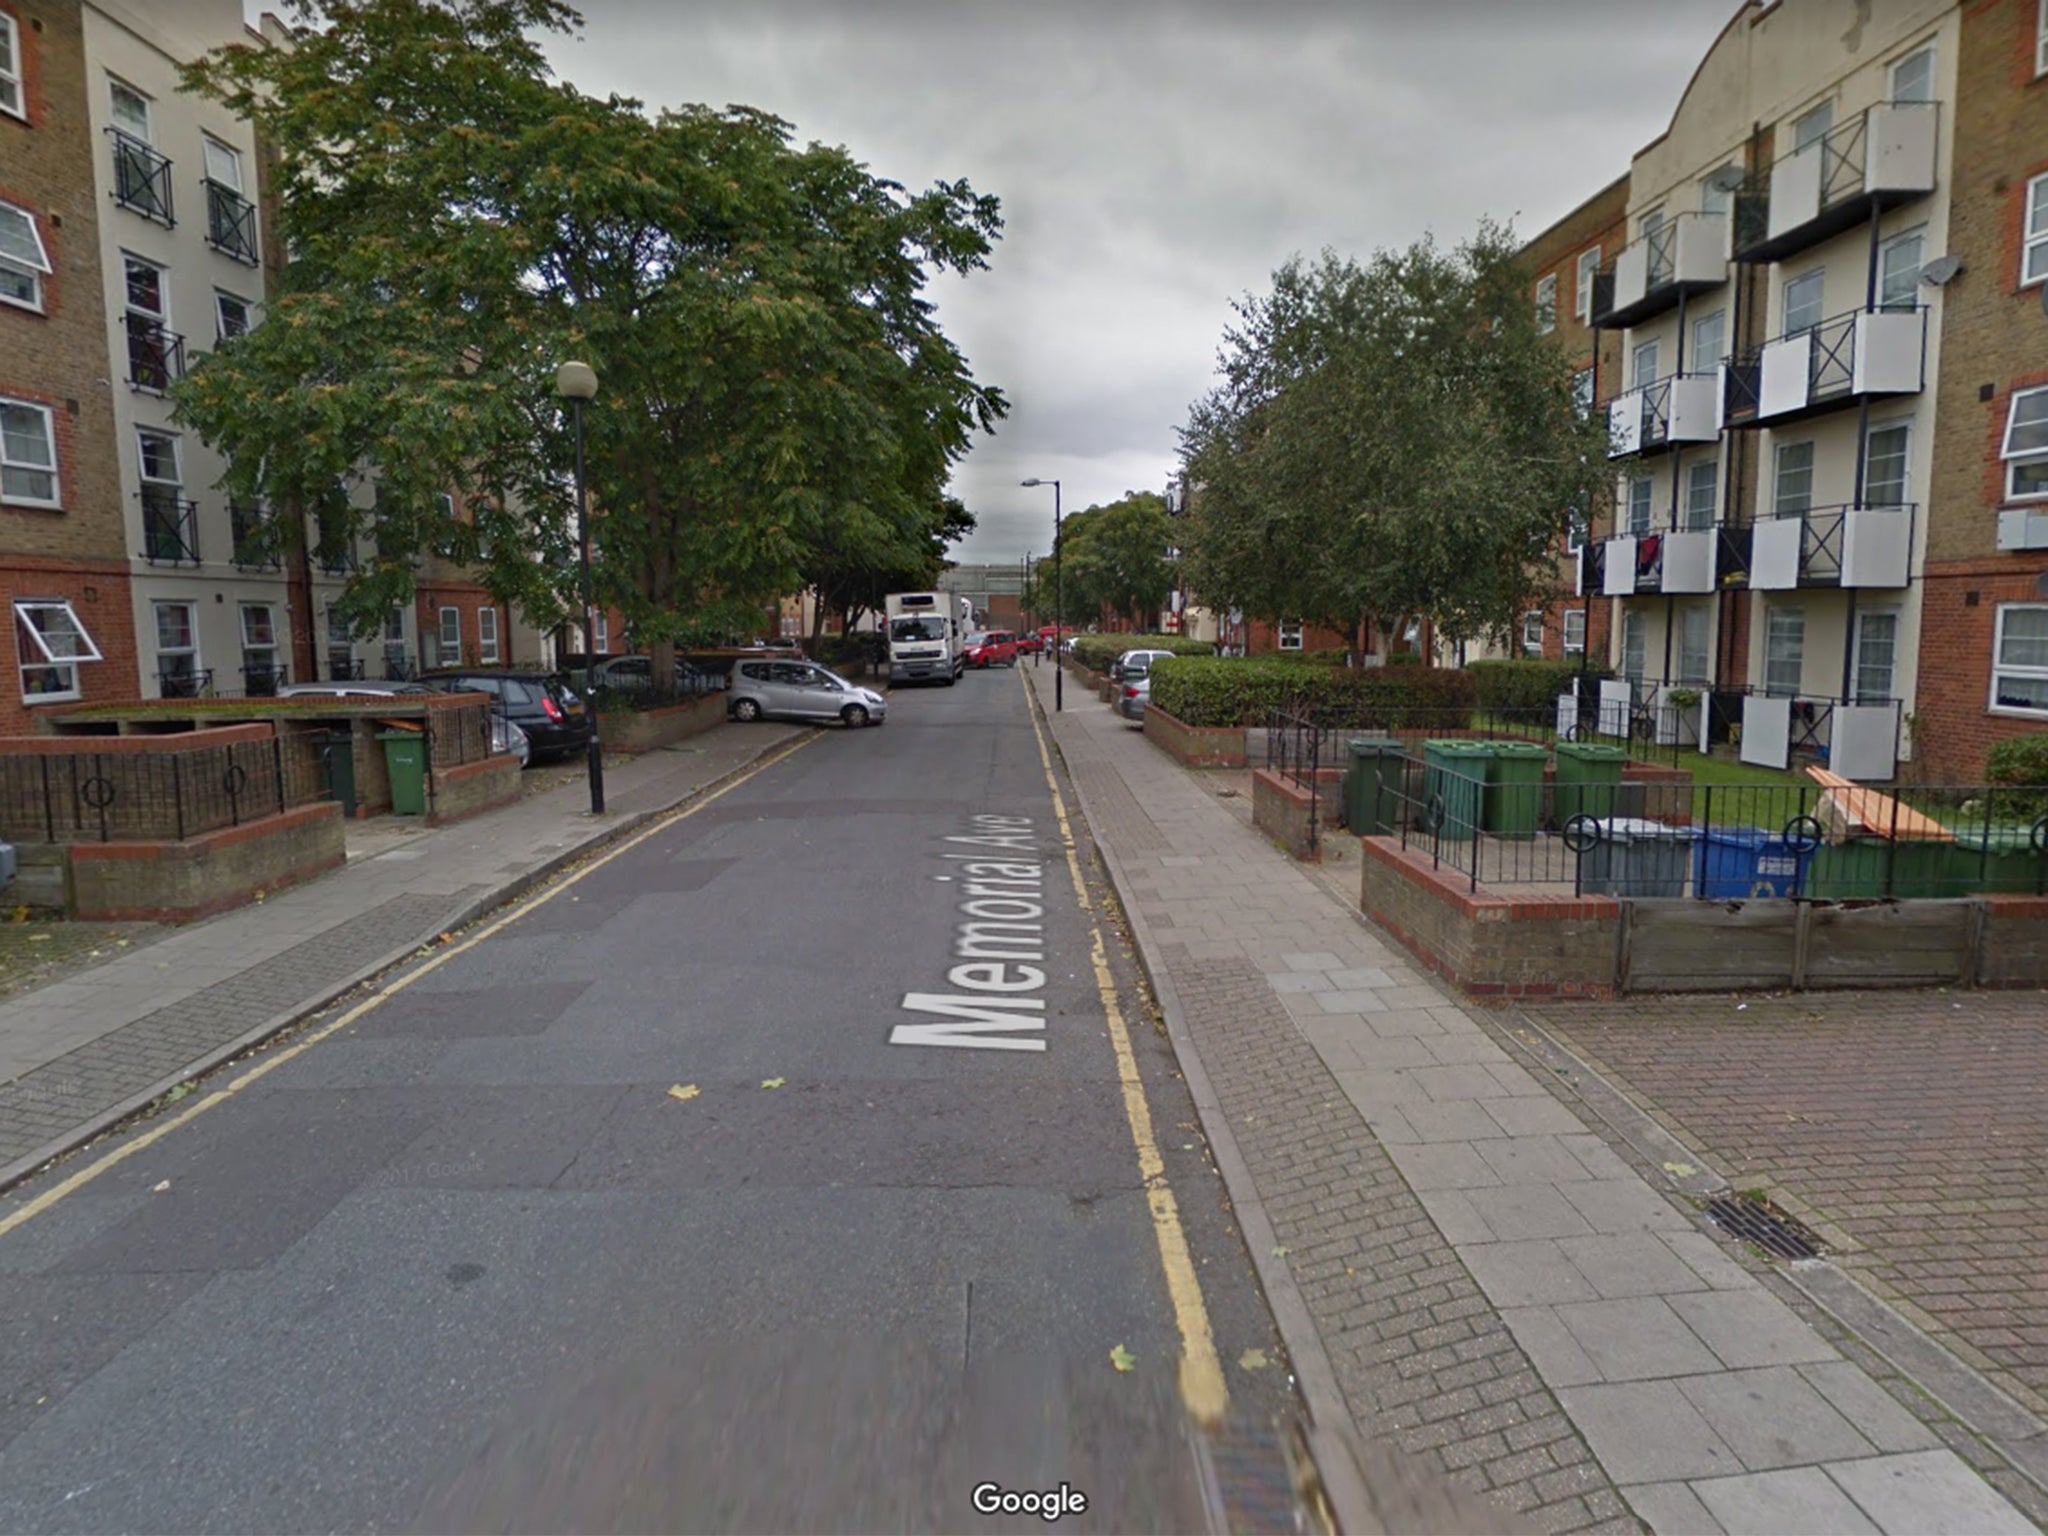 A 20-year-old man was stabbed to death in Memorial Avenue, West Ham just after 7.30pm